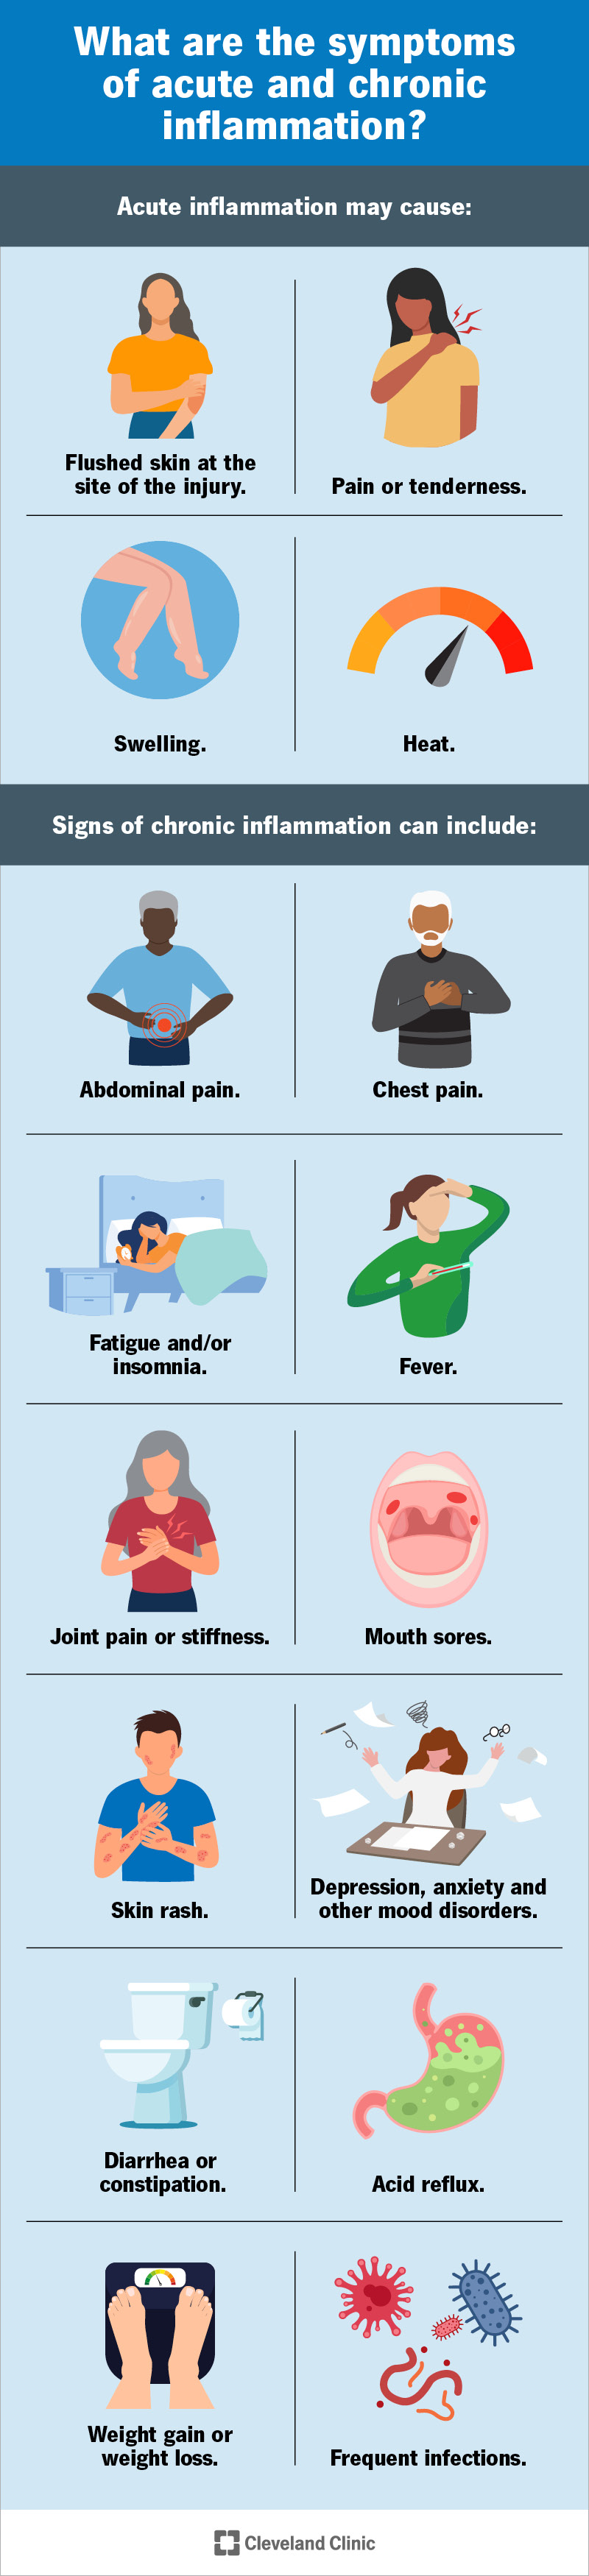 Signs and symptoms of acute and chronic inflammation.